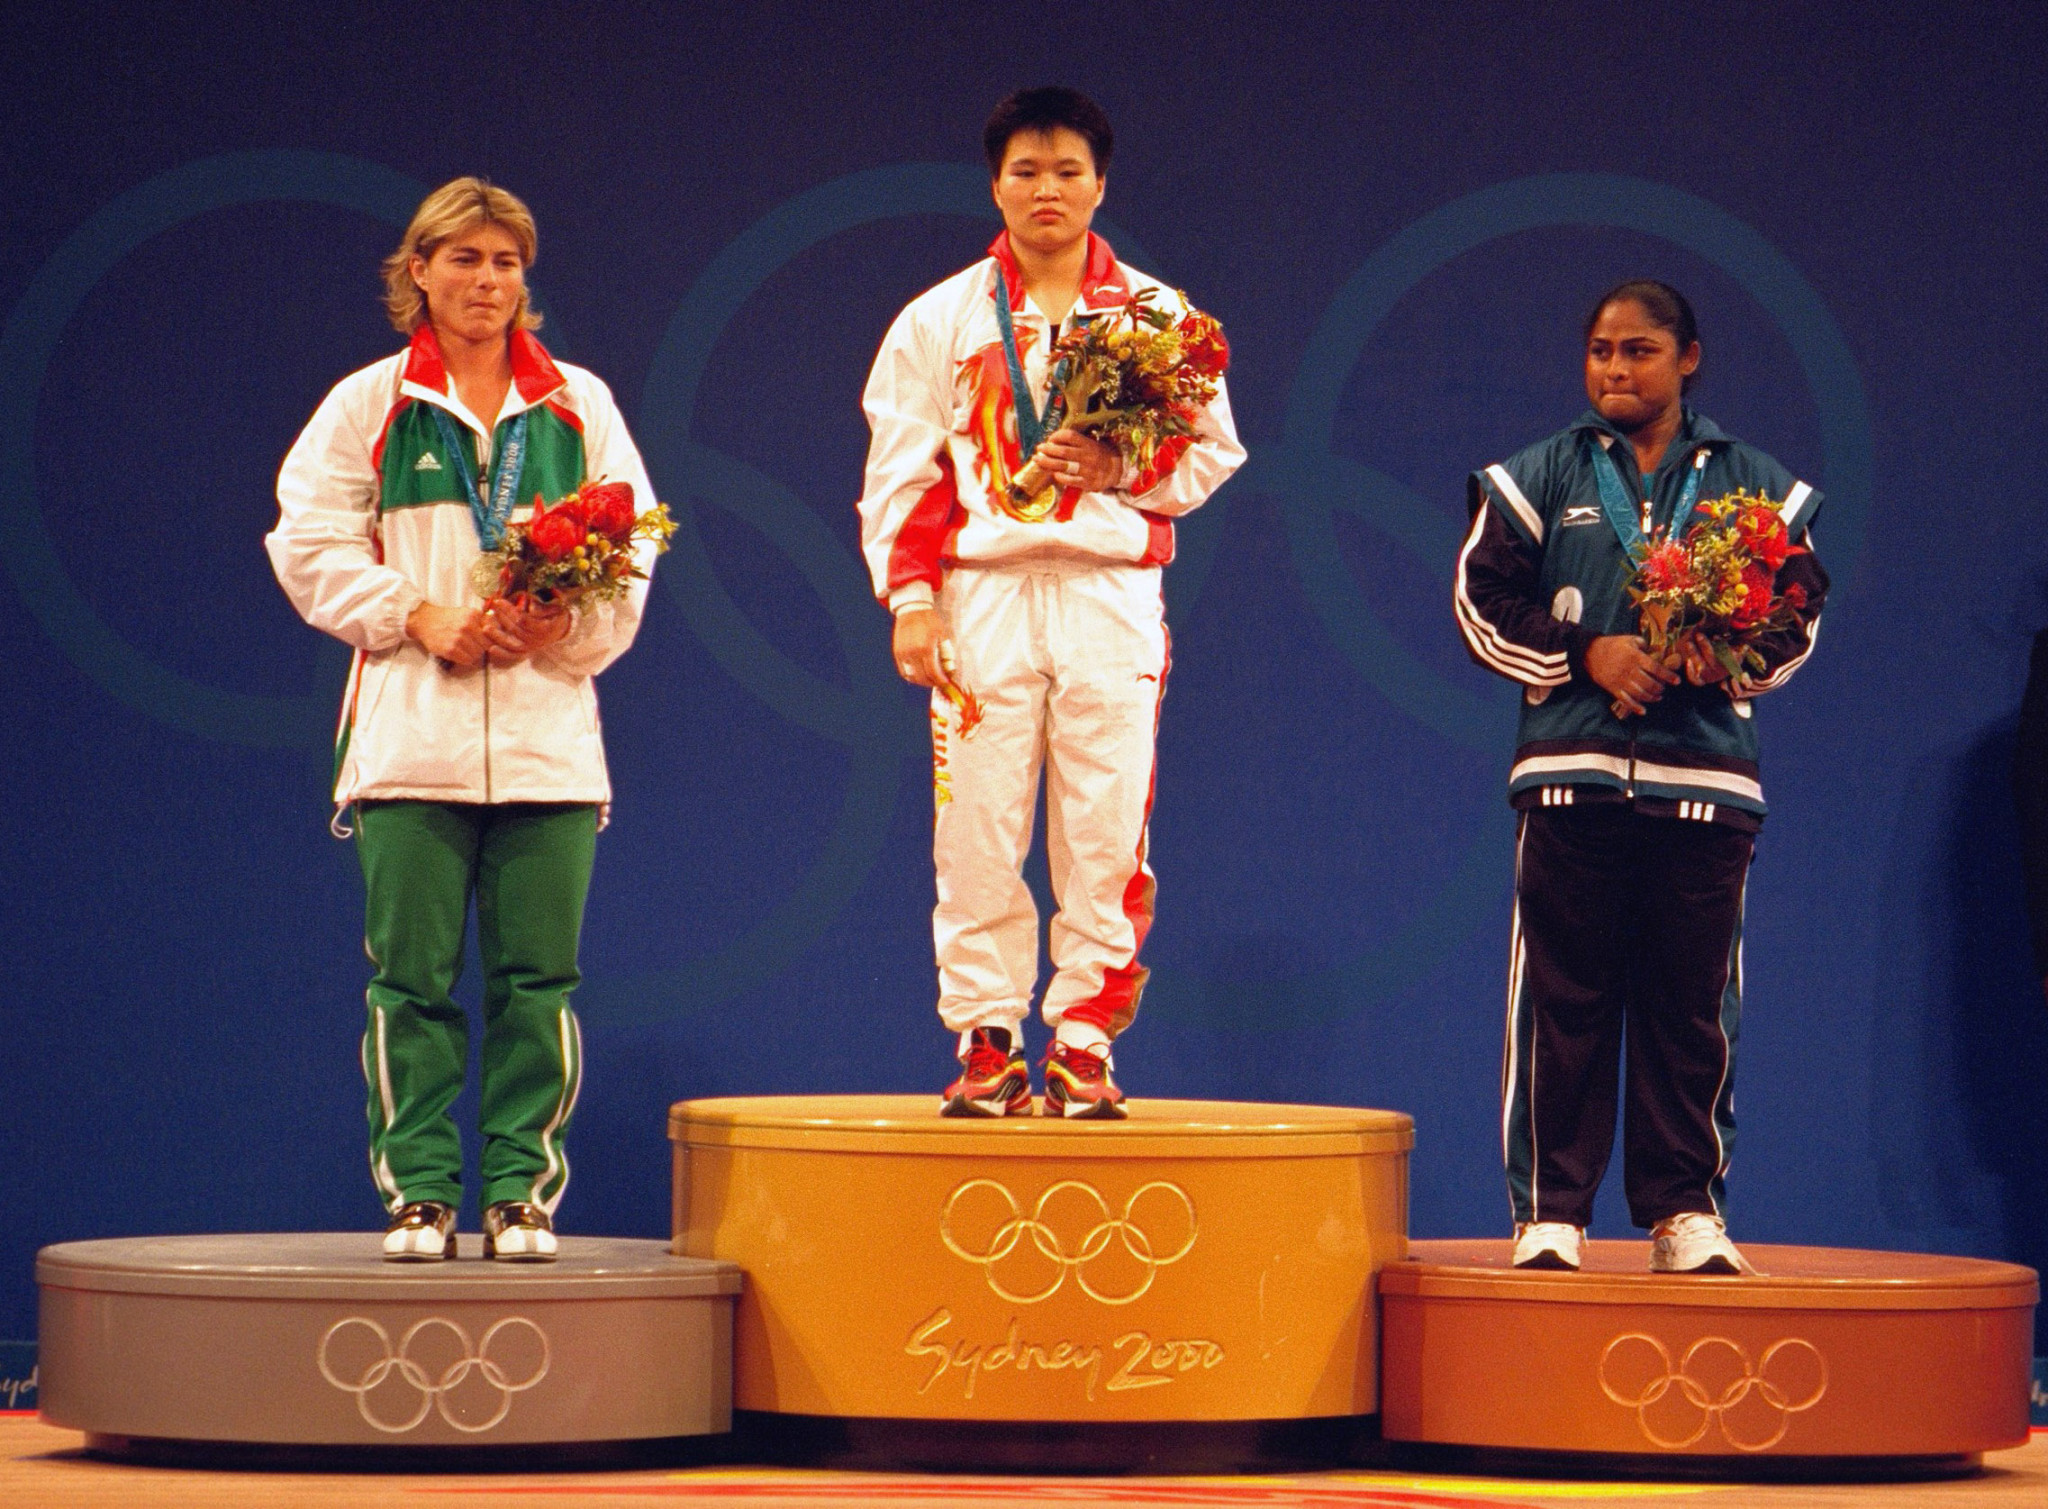 Karnam Malleswari, right, won a bronze medal in the women's 69 kilograms weightlifting category at Sydney 2000 ©Getty Images